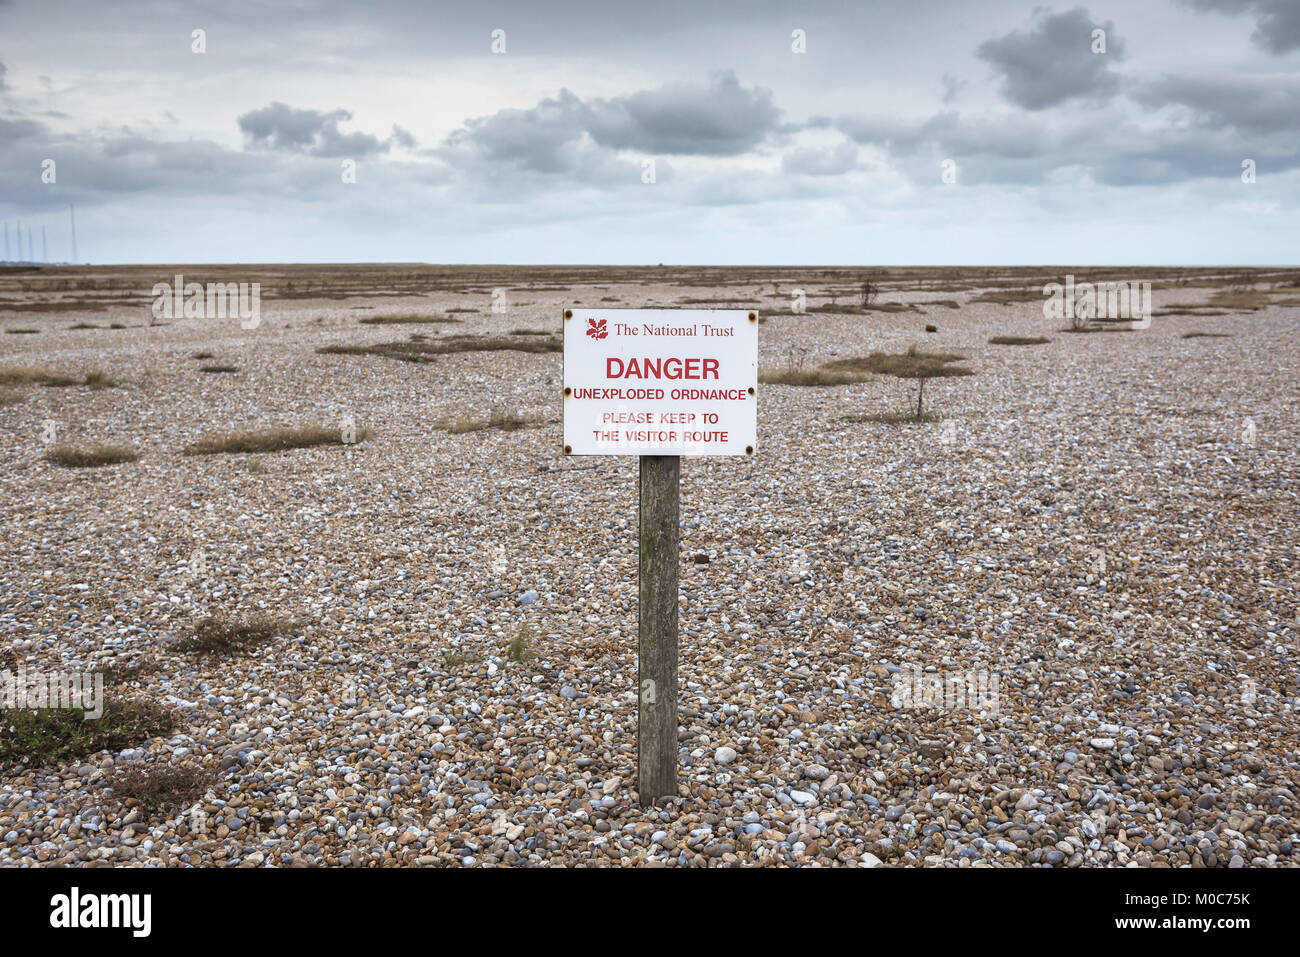 Orford Ness Suffolk, a National Trust sign sited at Orford Ness warning of the dangers to visitors of straying from designated paths, England, UK. Stock Photo